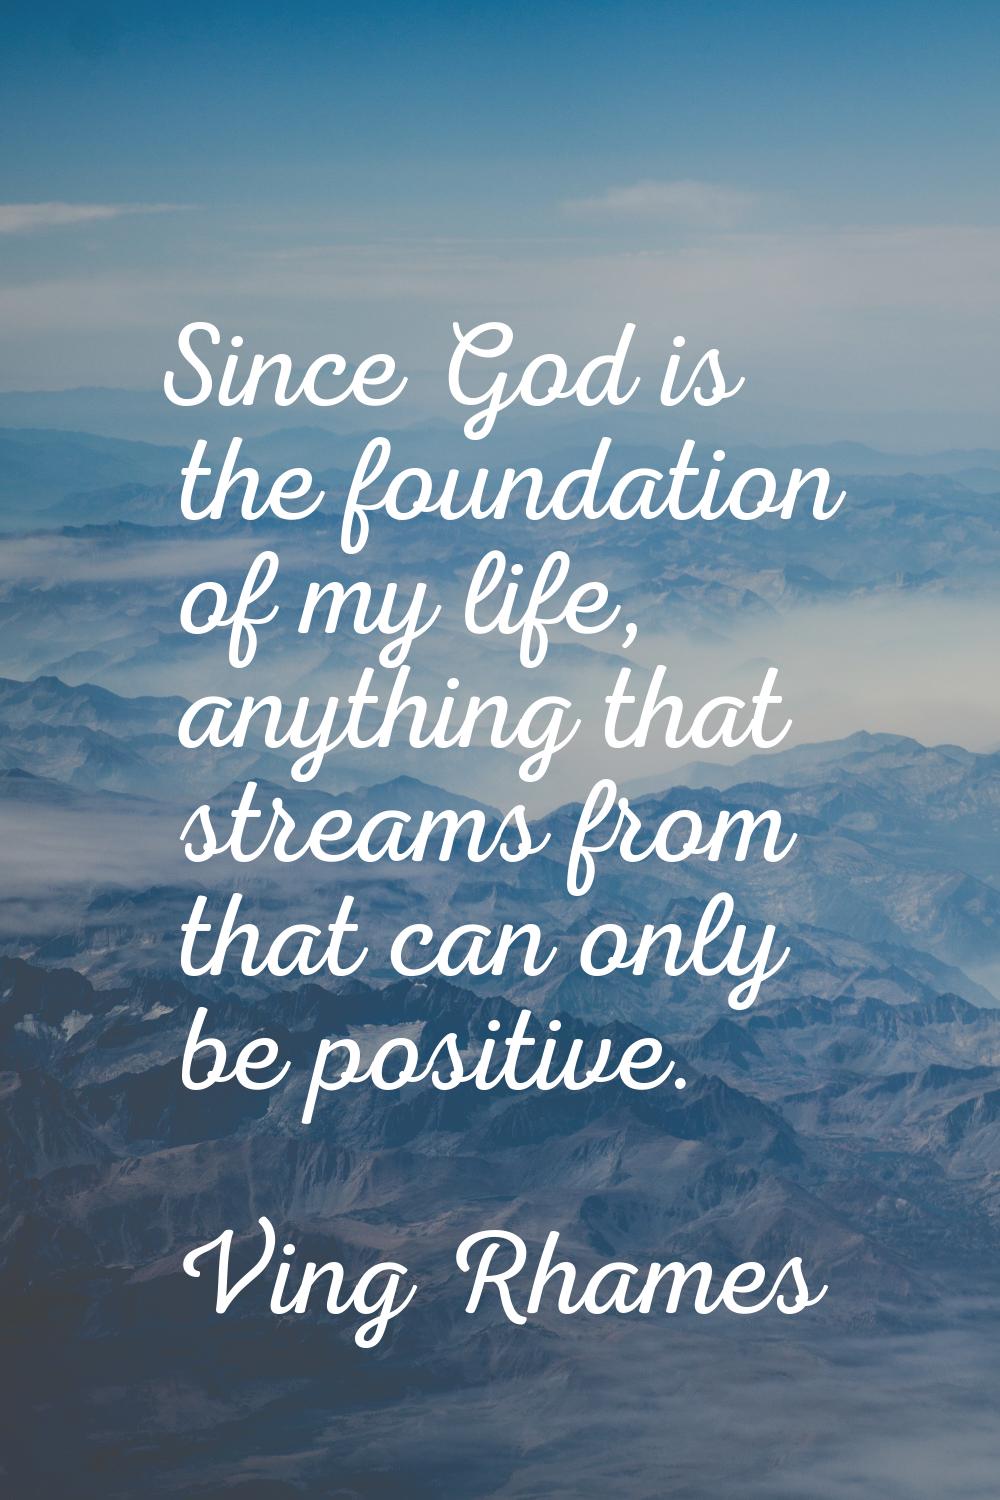 Since God is the foundation of my life, anything that streams from that can only be positive.